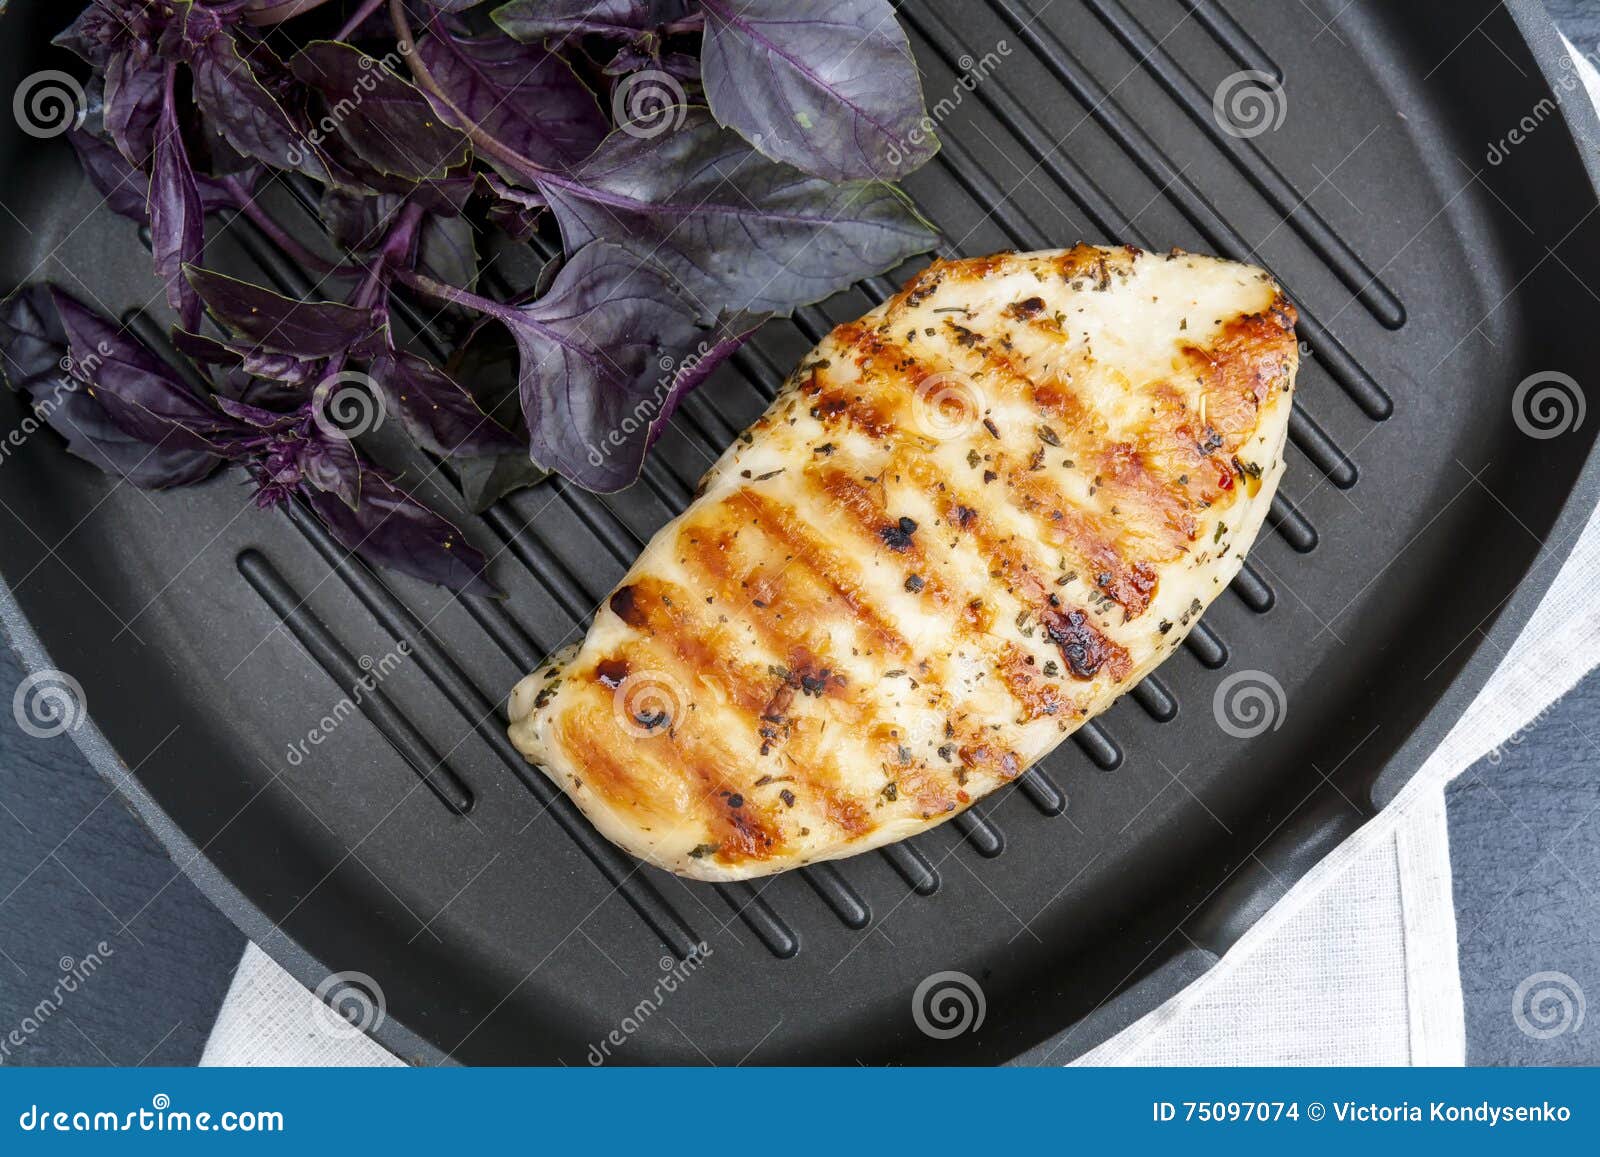 Grilled Chicken Breast with Violet Basil on Teflon Pan Grill Stock Photo - of grilled: 75097074